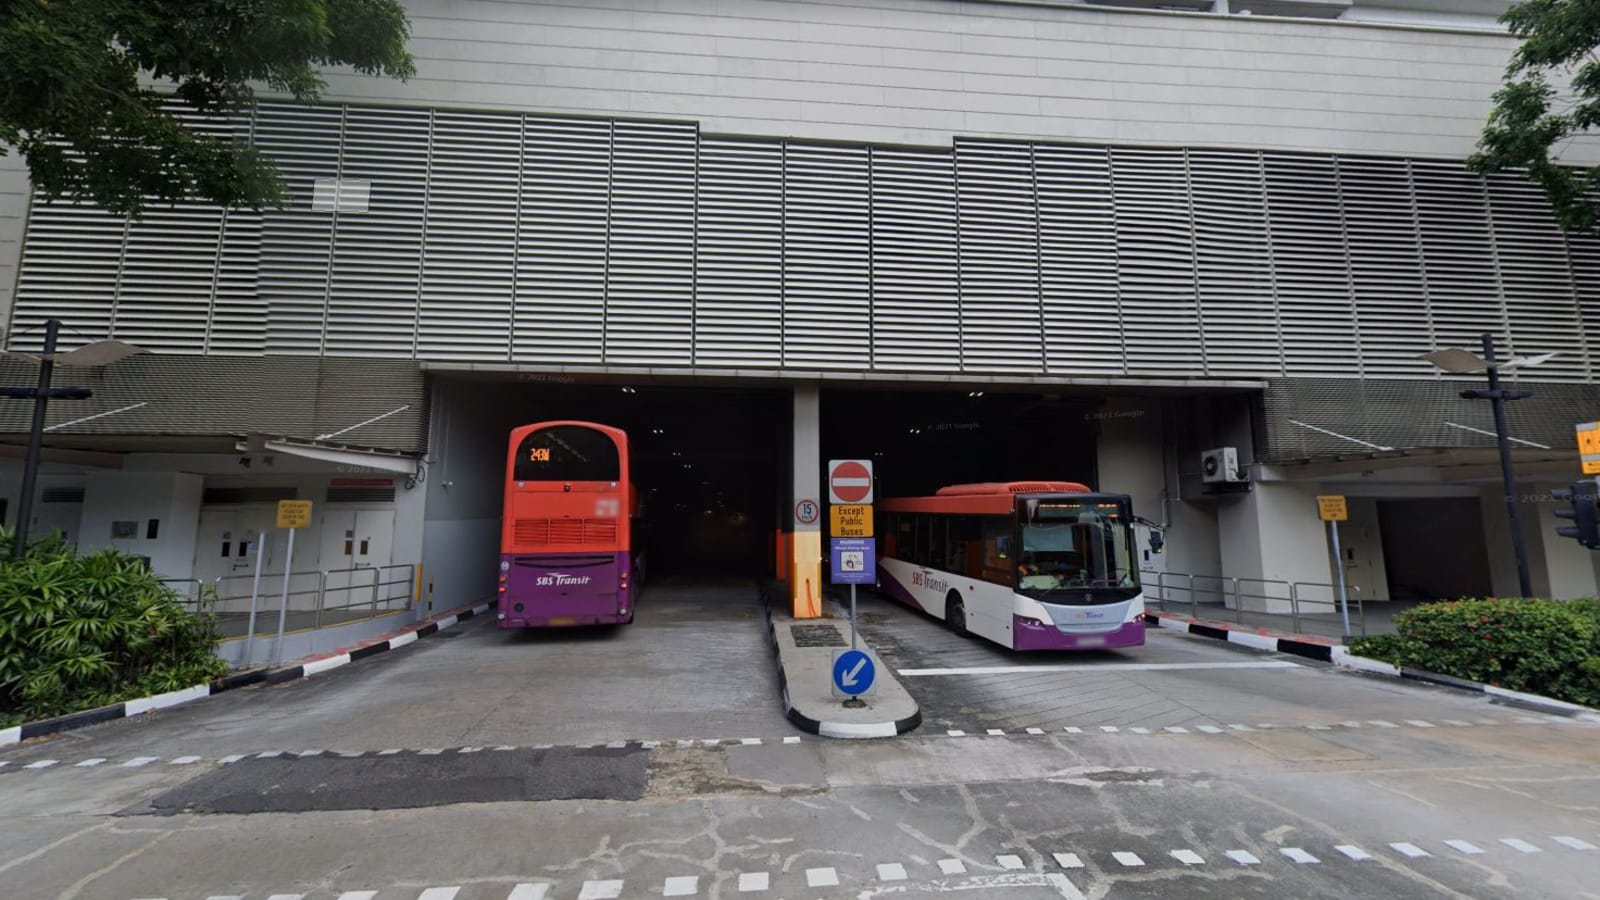 120 bus captains and 7 interchanges: A timeline of COVID-19 cases among bus interchange staff